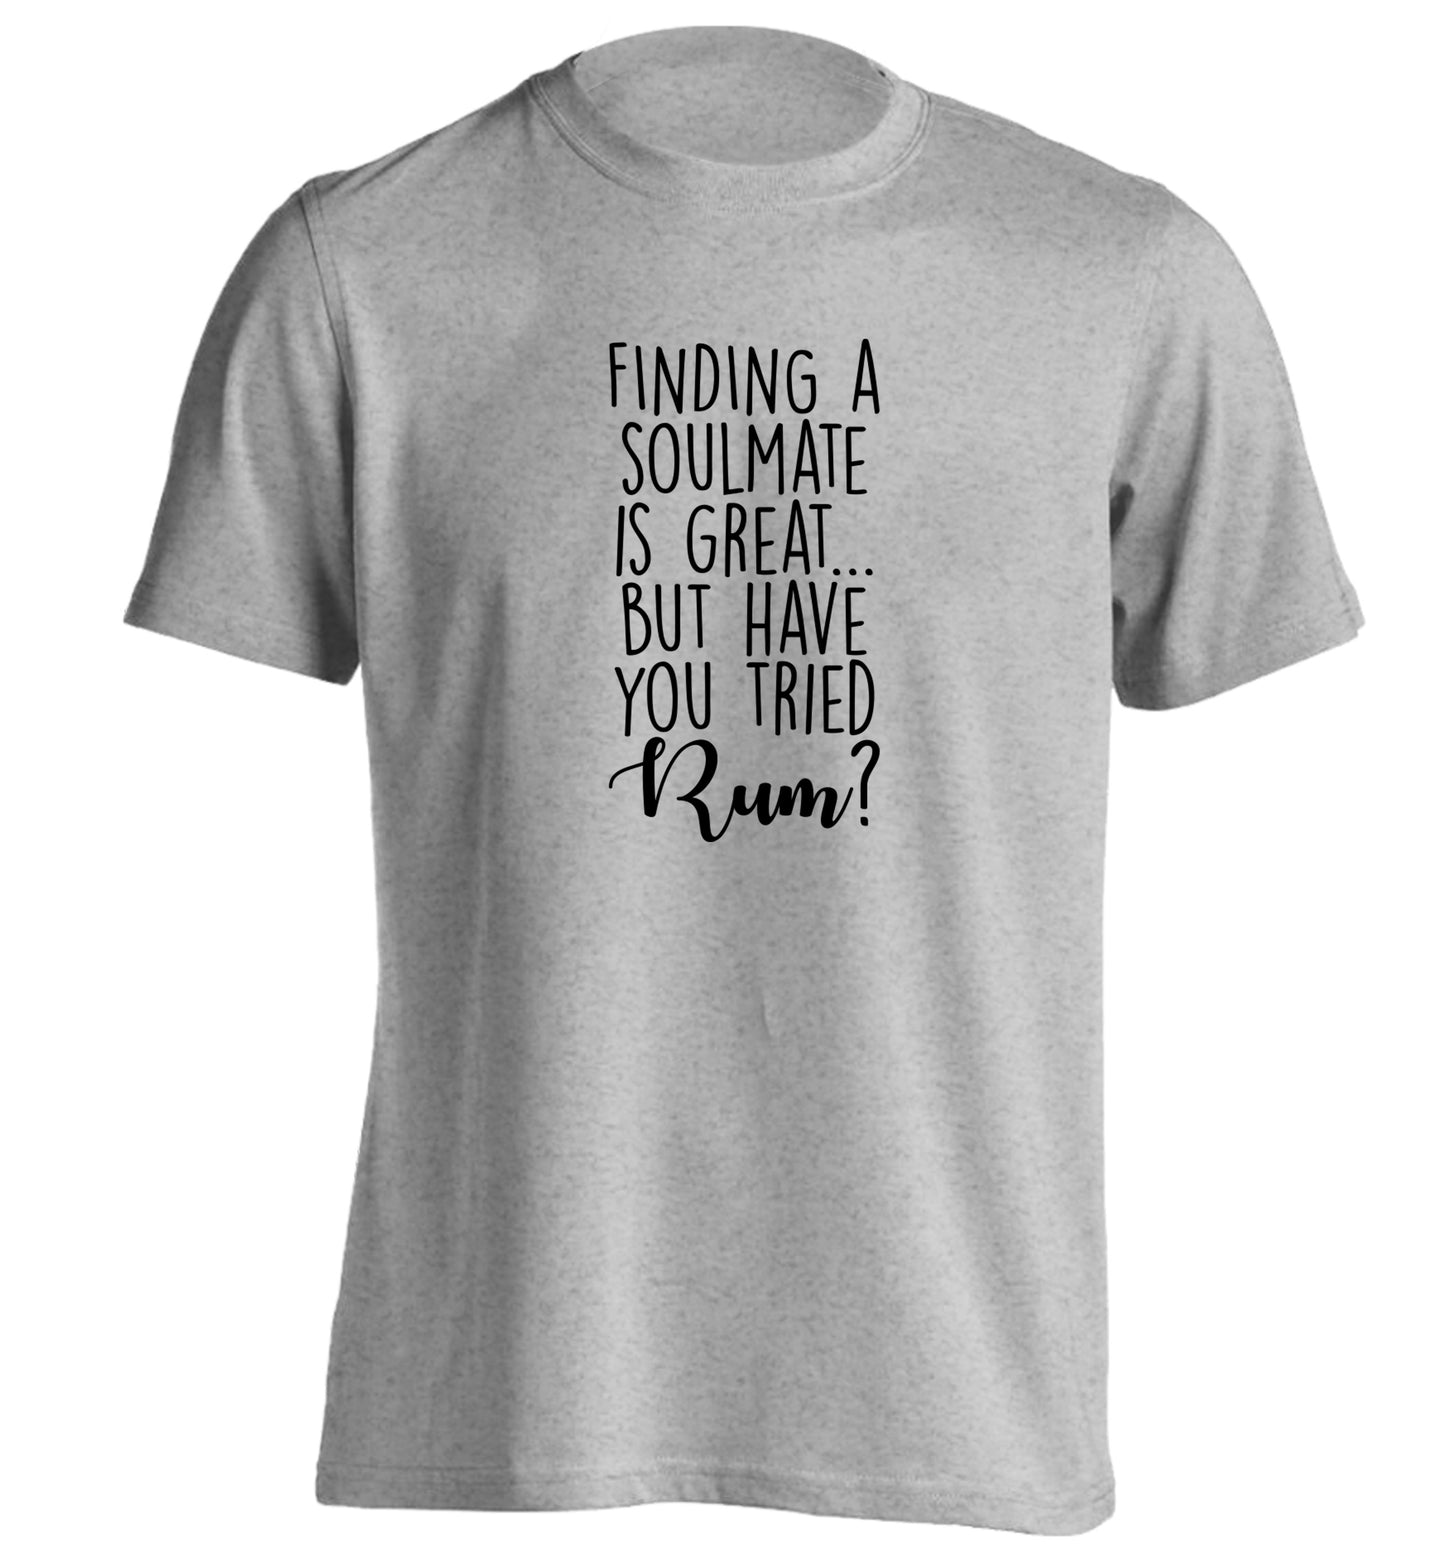 Finding a soulmate is great but have you tried rum? adults unisex grey Tshirt 2XL